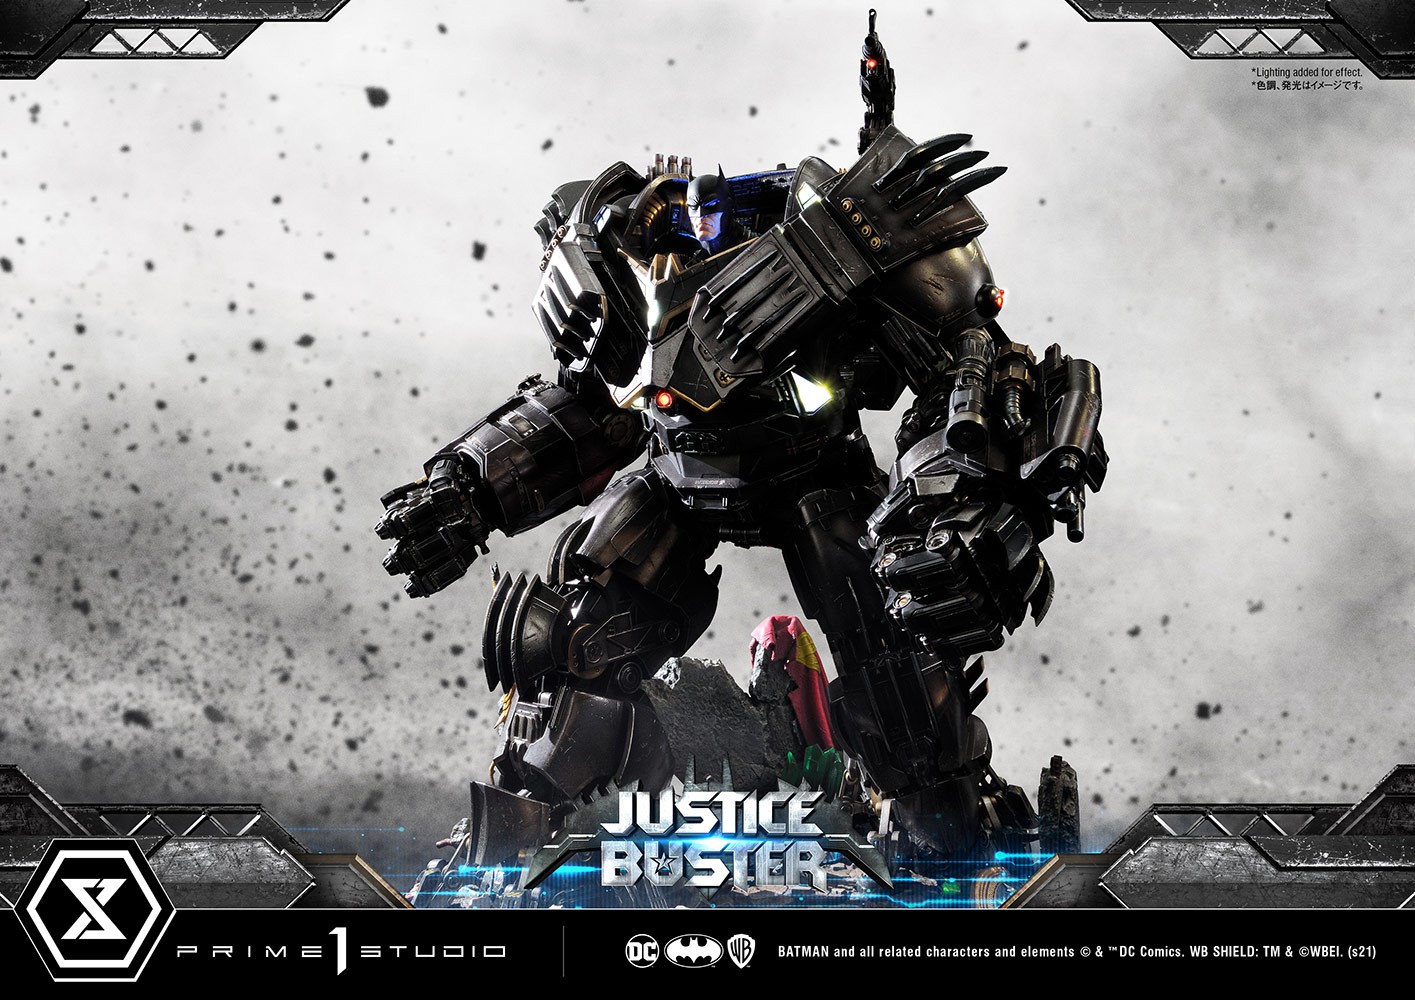 Justice Buster (Prototype Shown) View 44